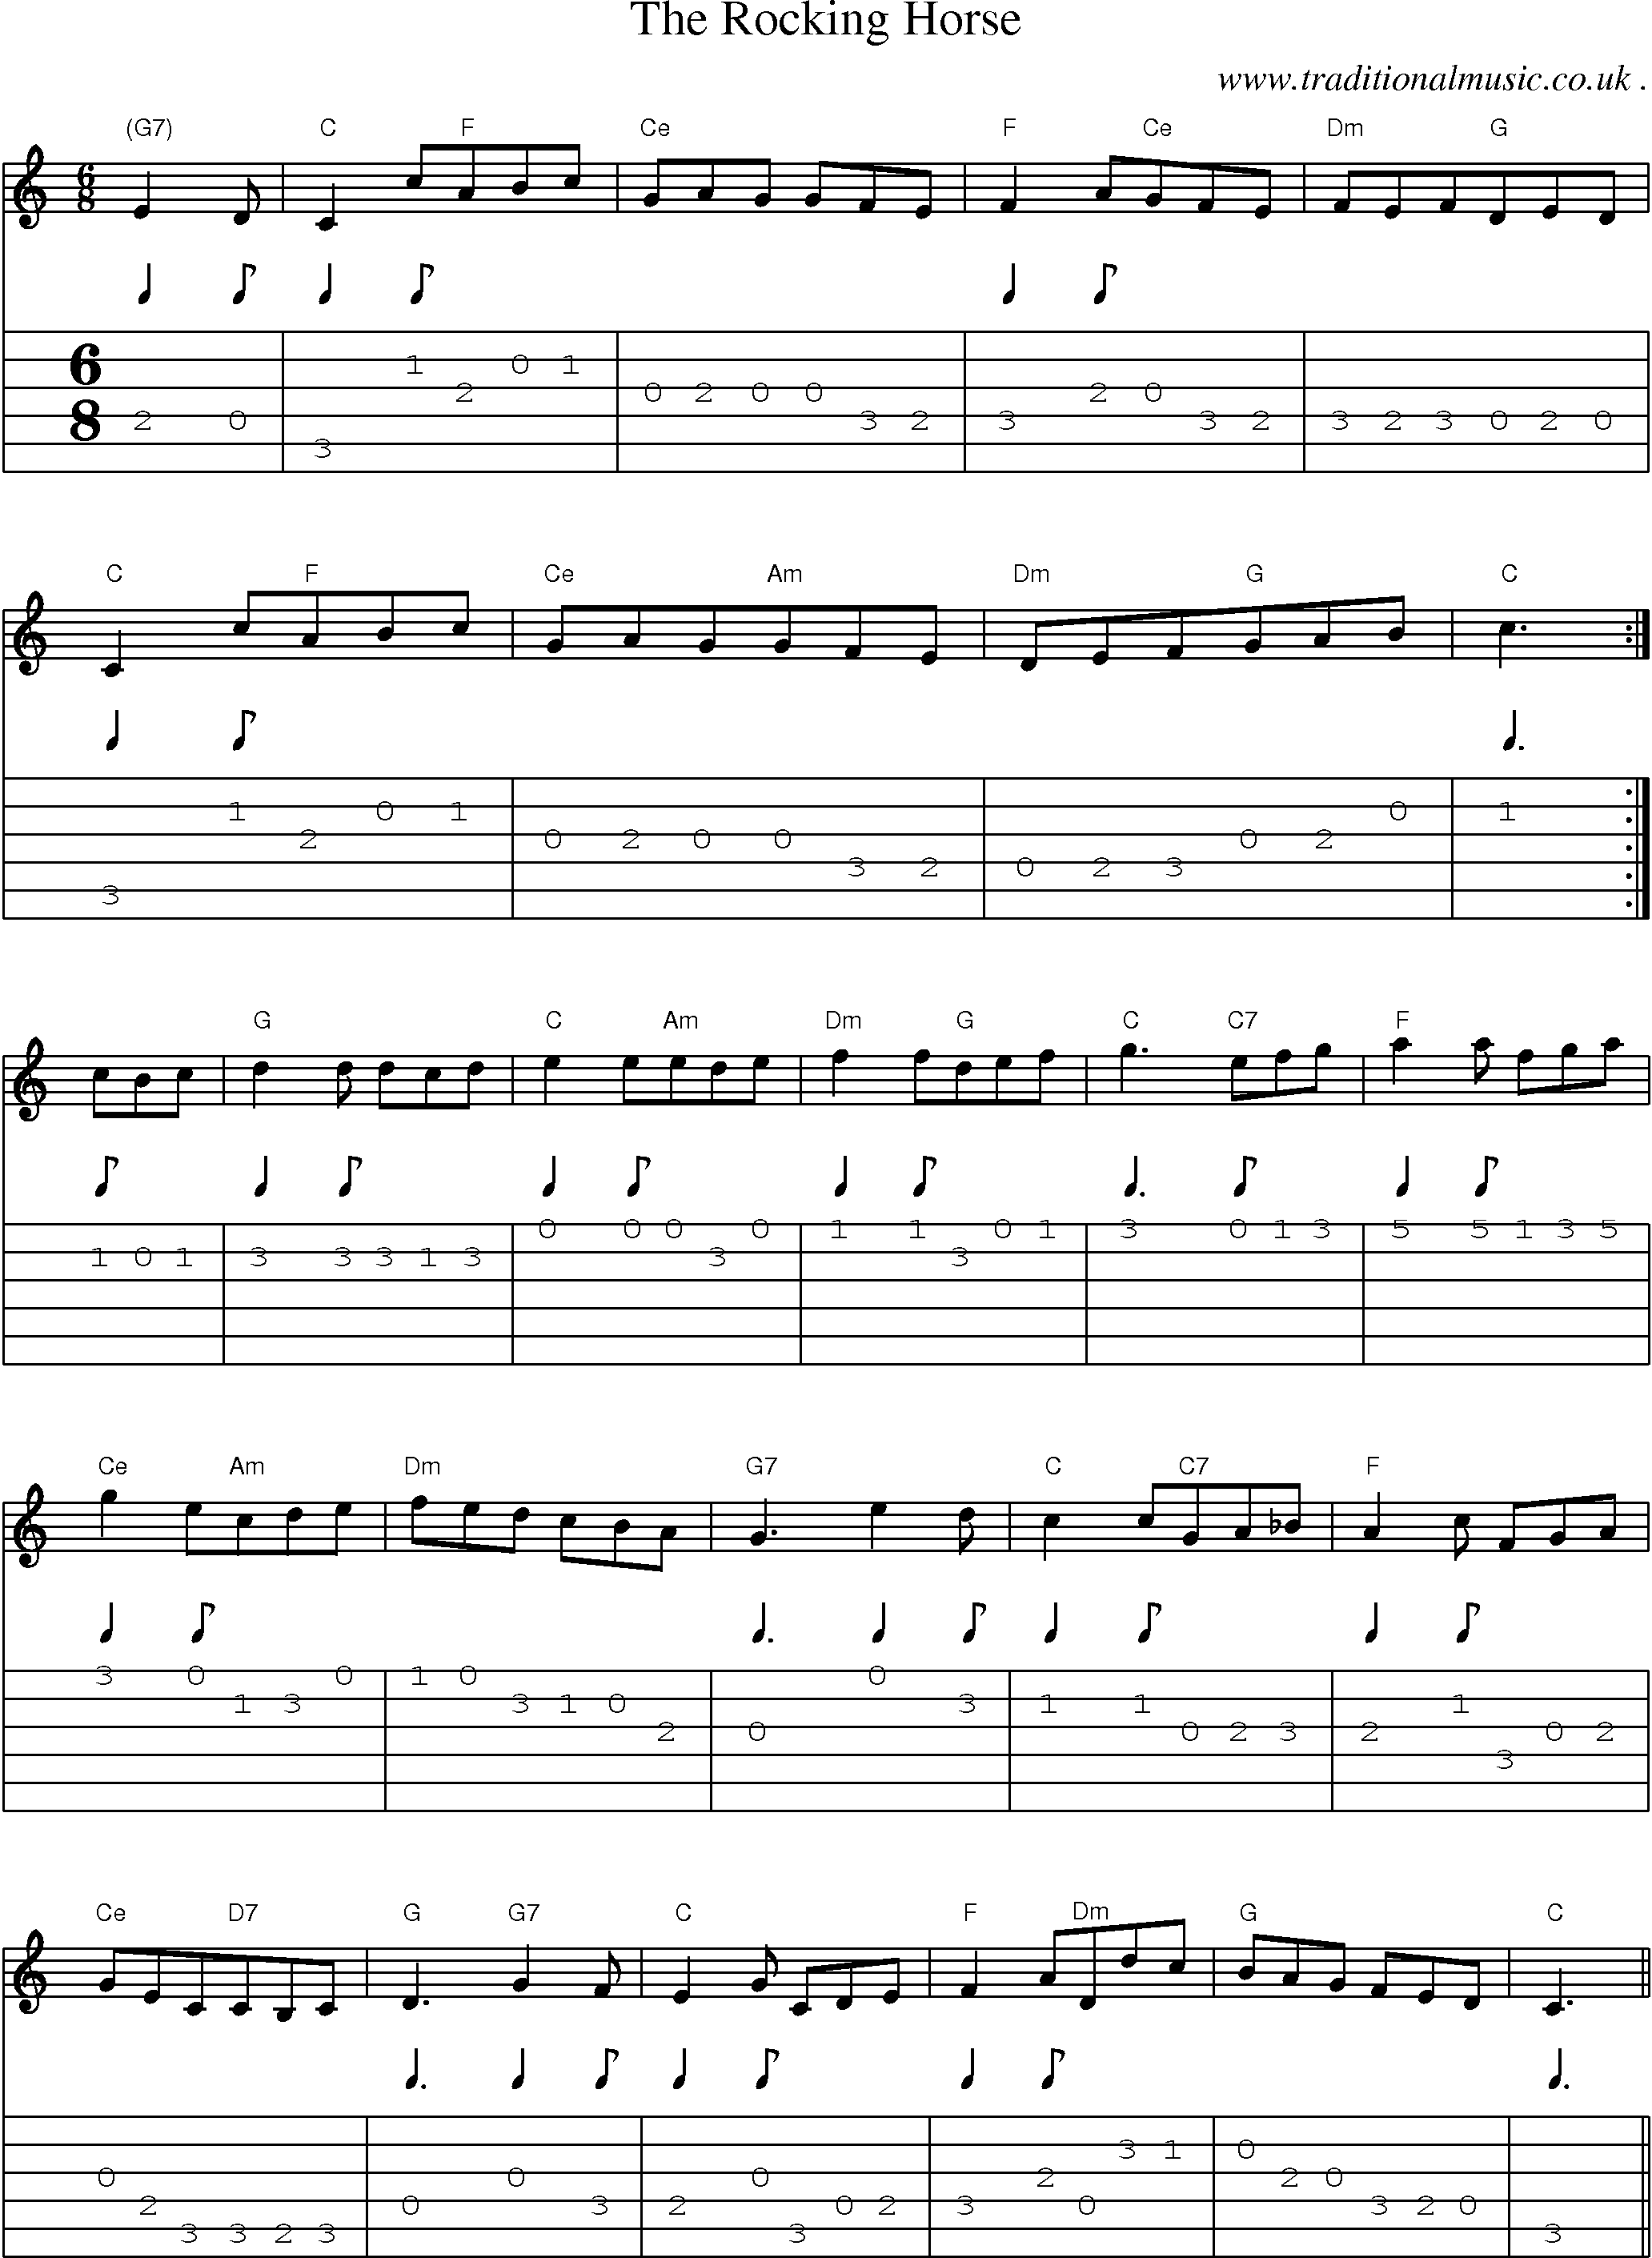 Sheet-Music and Guitar Tabs for The Rocking Horse